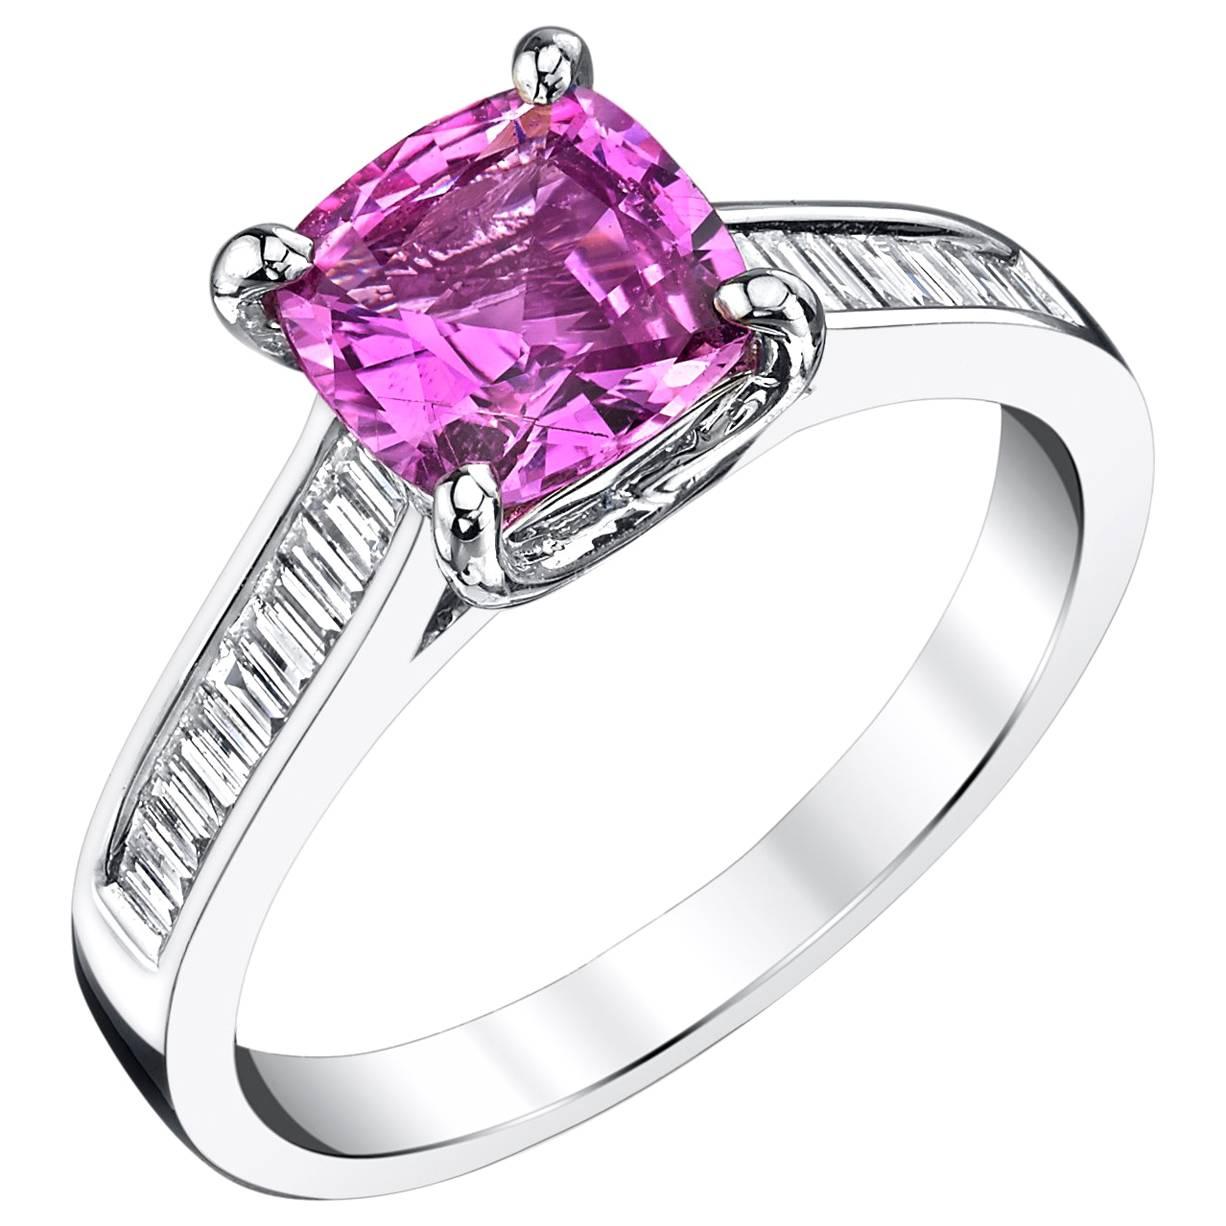 1.78 Carat Pink Sapphire and Diamond Baguette Engagement Ring in 18k White Gold 